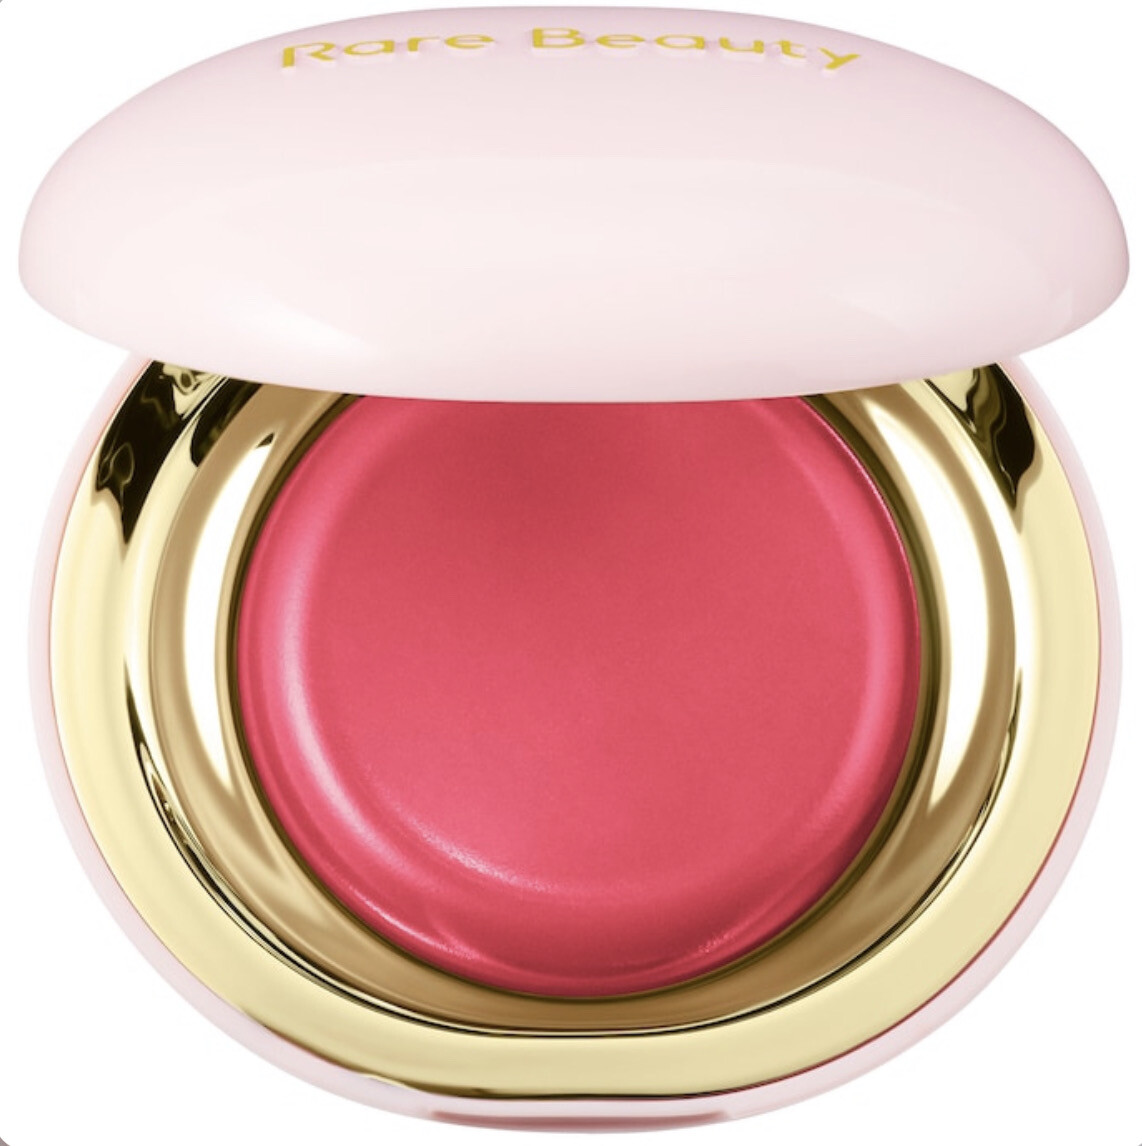 Rare Beauty - Stay Vulnerable Melting Cream Blush | Nearly Rose - true pink